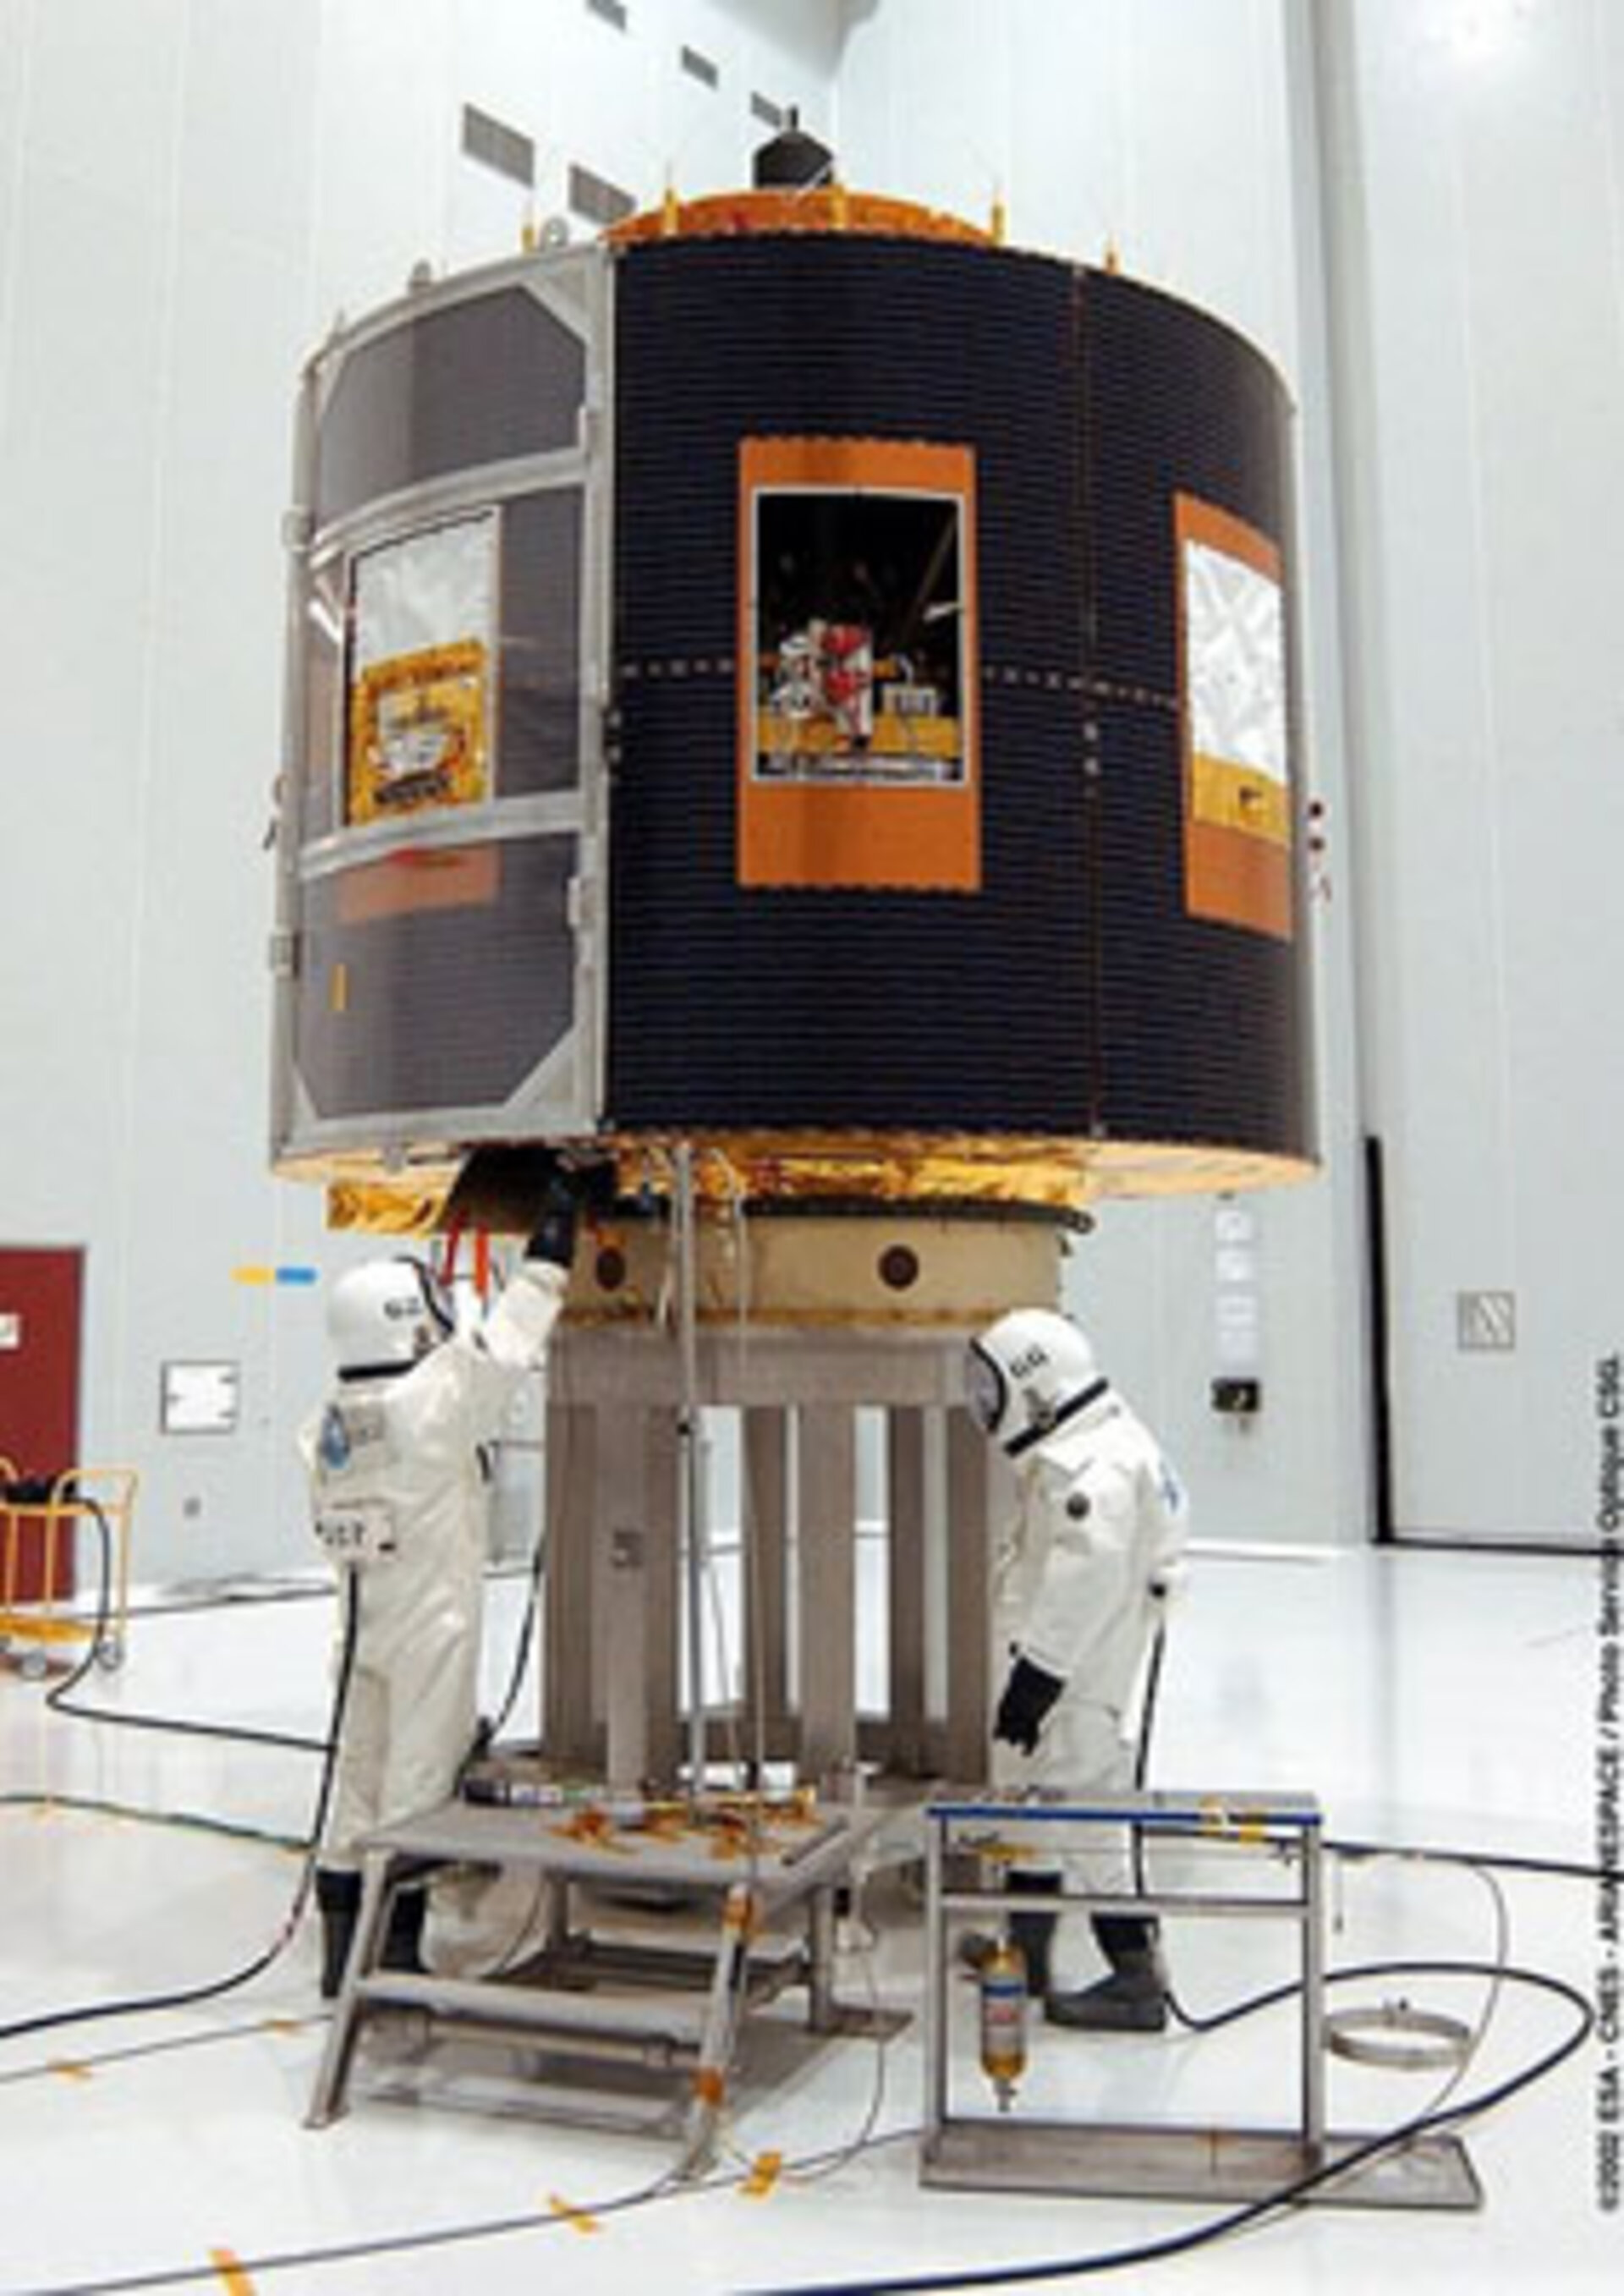 MSG-1 is ready for lift-off